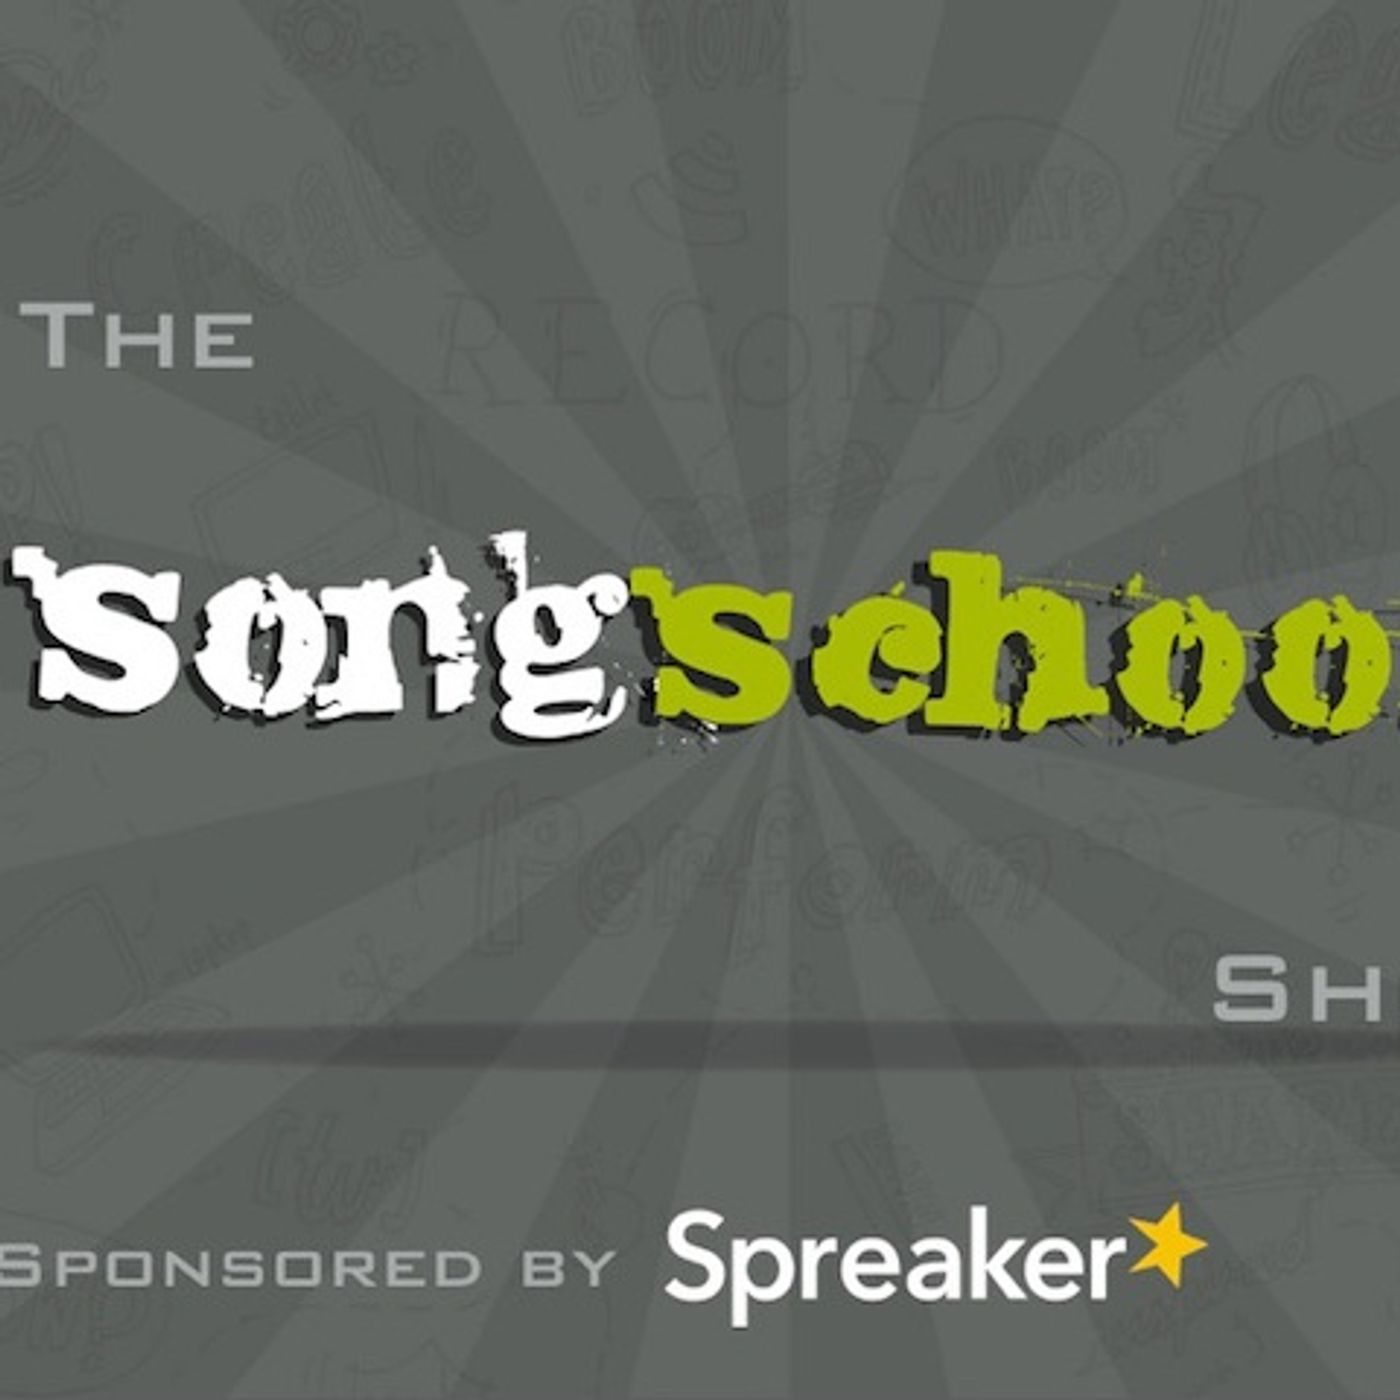 The Songschool Show @ The Drum Youth Centre Kilkenny